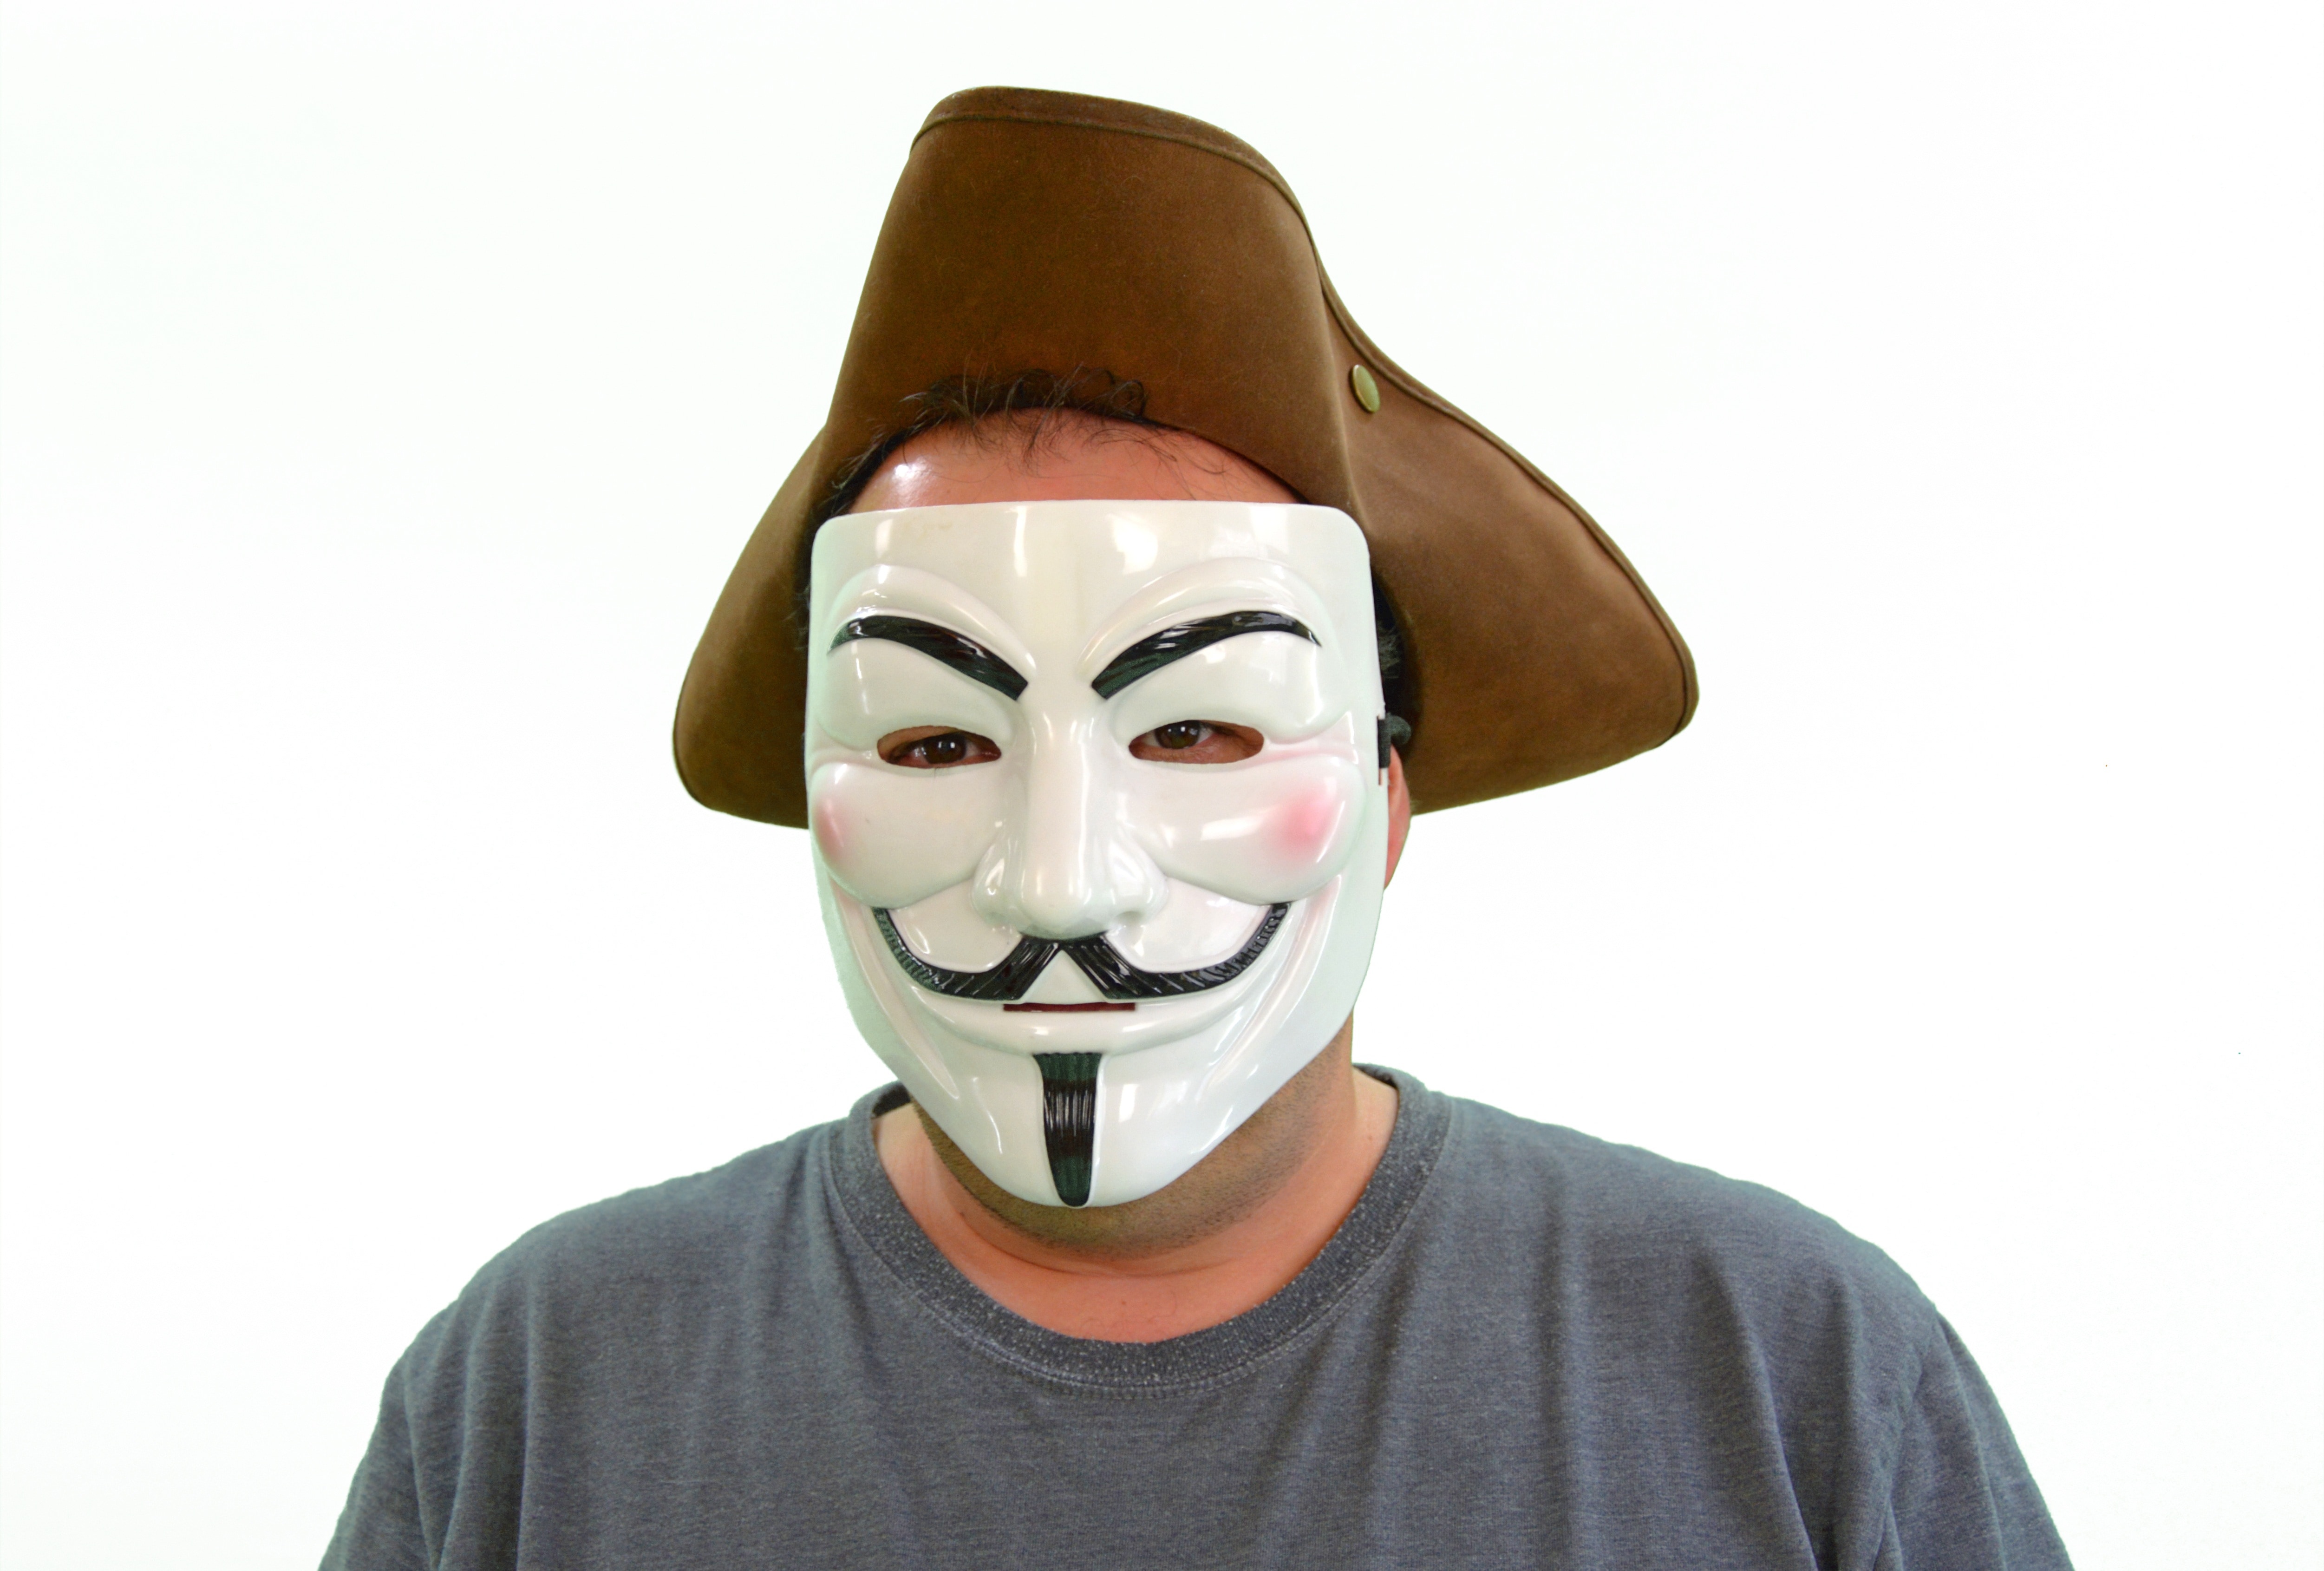 person wearing unanimous mask and gray shirt